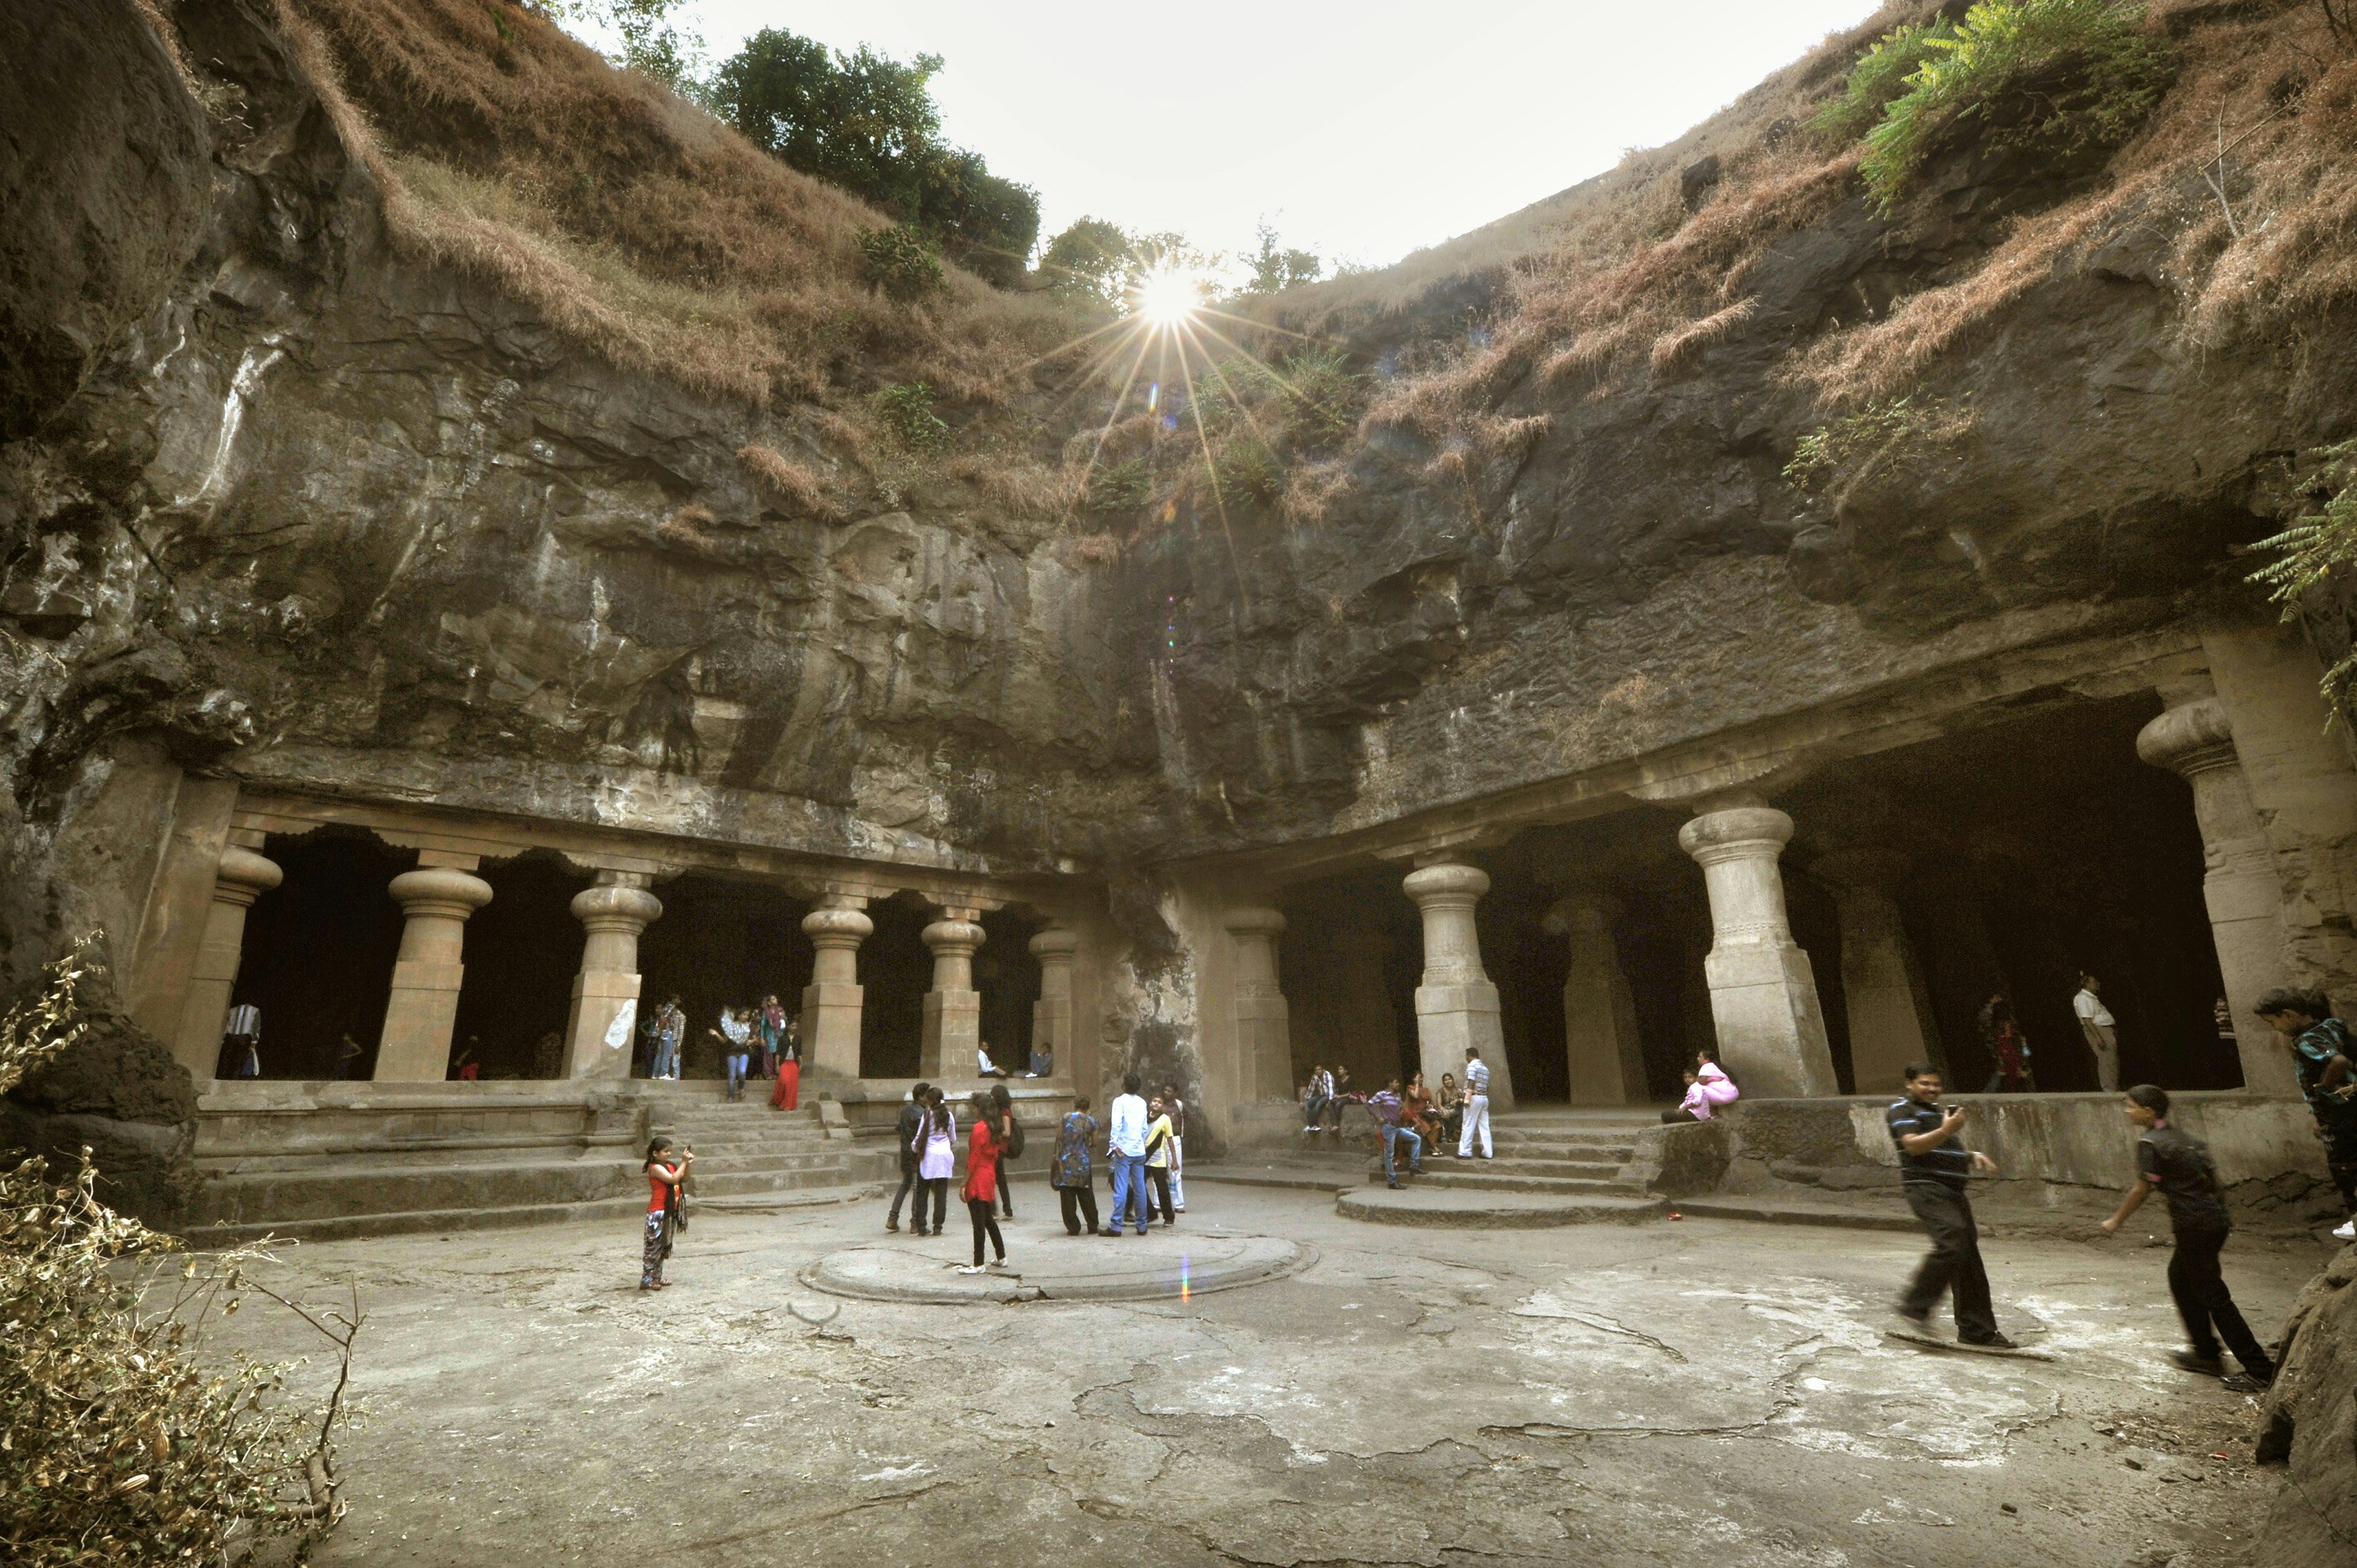 Groups of visitors wander around the Elephanta Cave complex in Mumbai. The complex includes several open-air 'courtyards', as shown here, with the sunlight shining down from above.